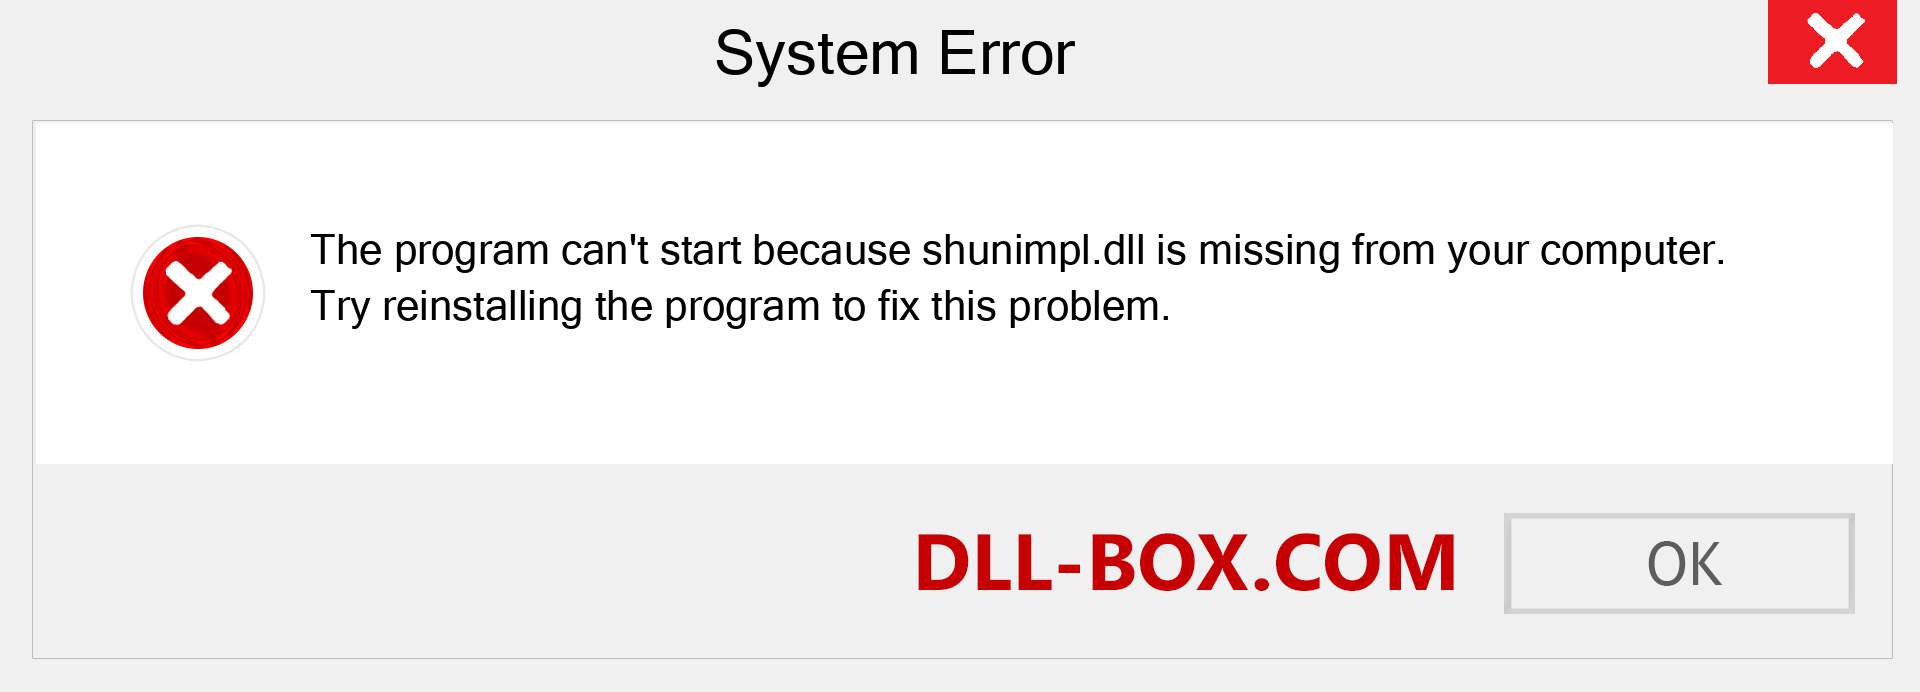  shunimpl.dll file is missing?. Download for Windows 7, 8, 10 - Fix  shunimpl dll Missing Error on Windows, photos, images